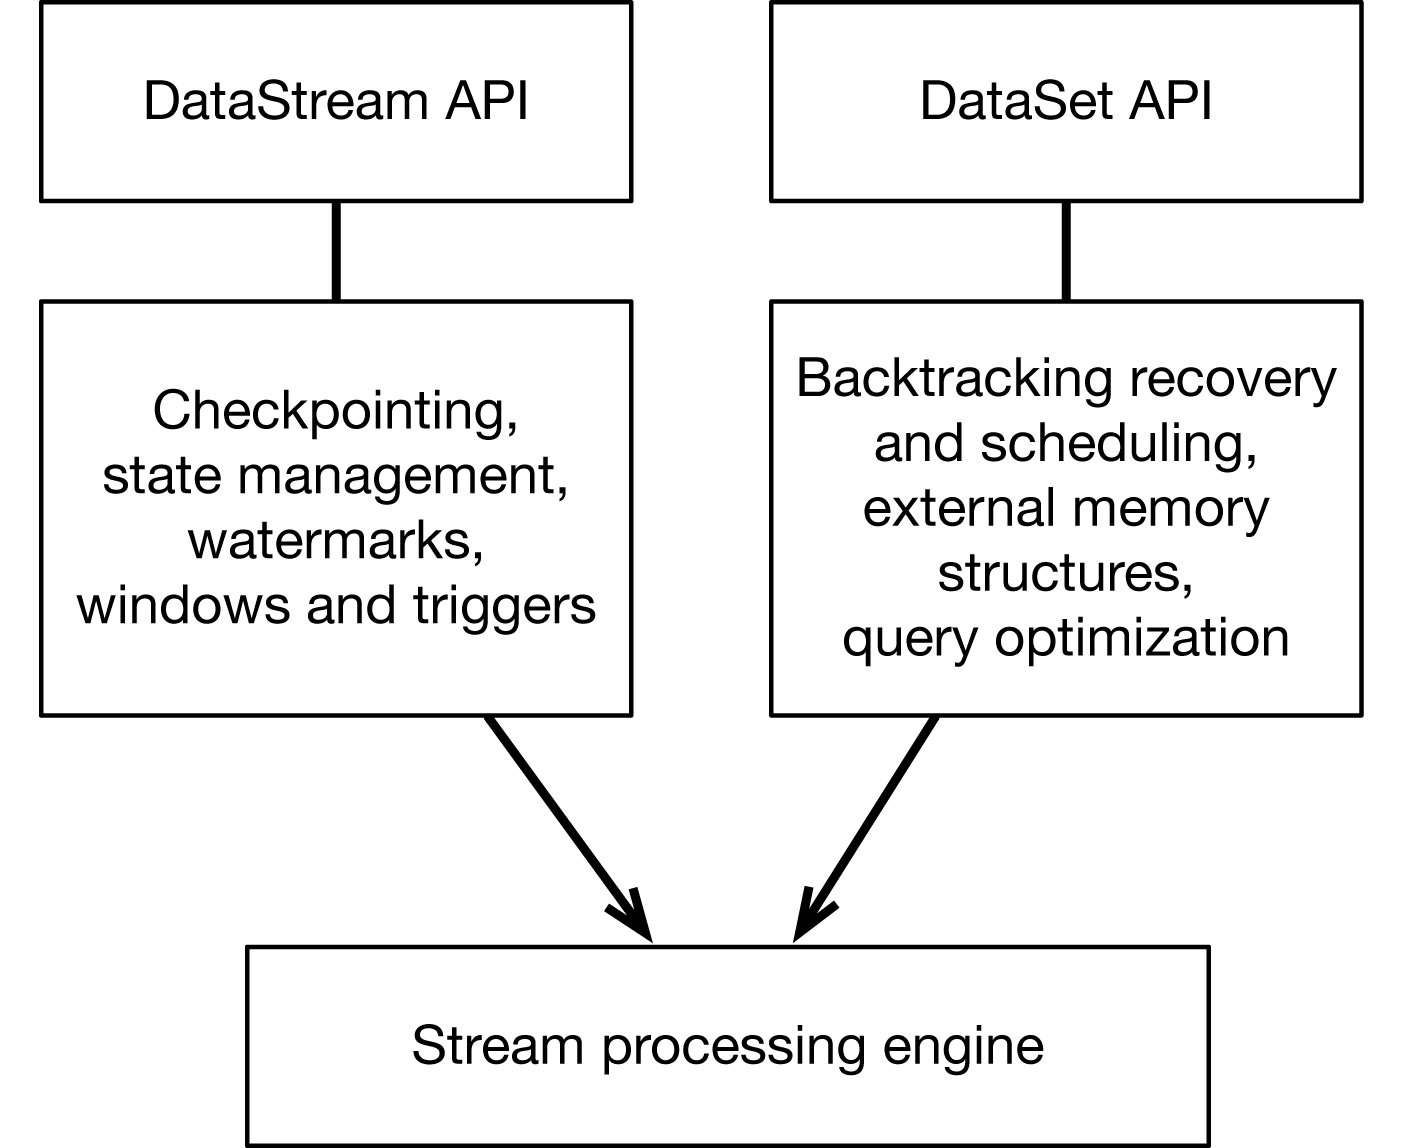 Flink’s architecture supports both stream and batch processing styles, with one underlying engine.